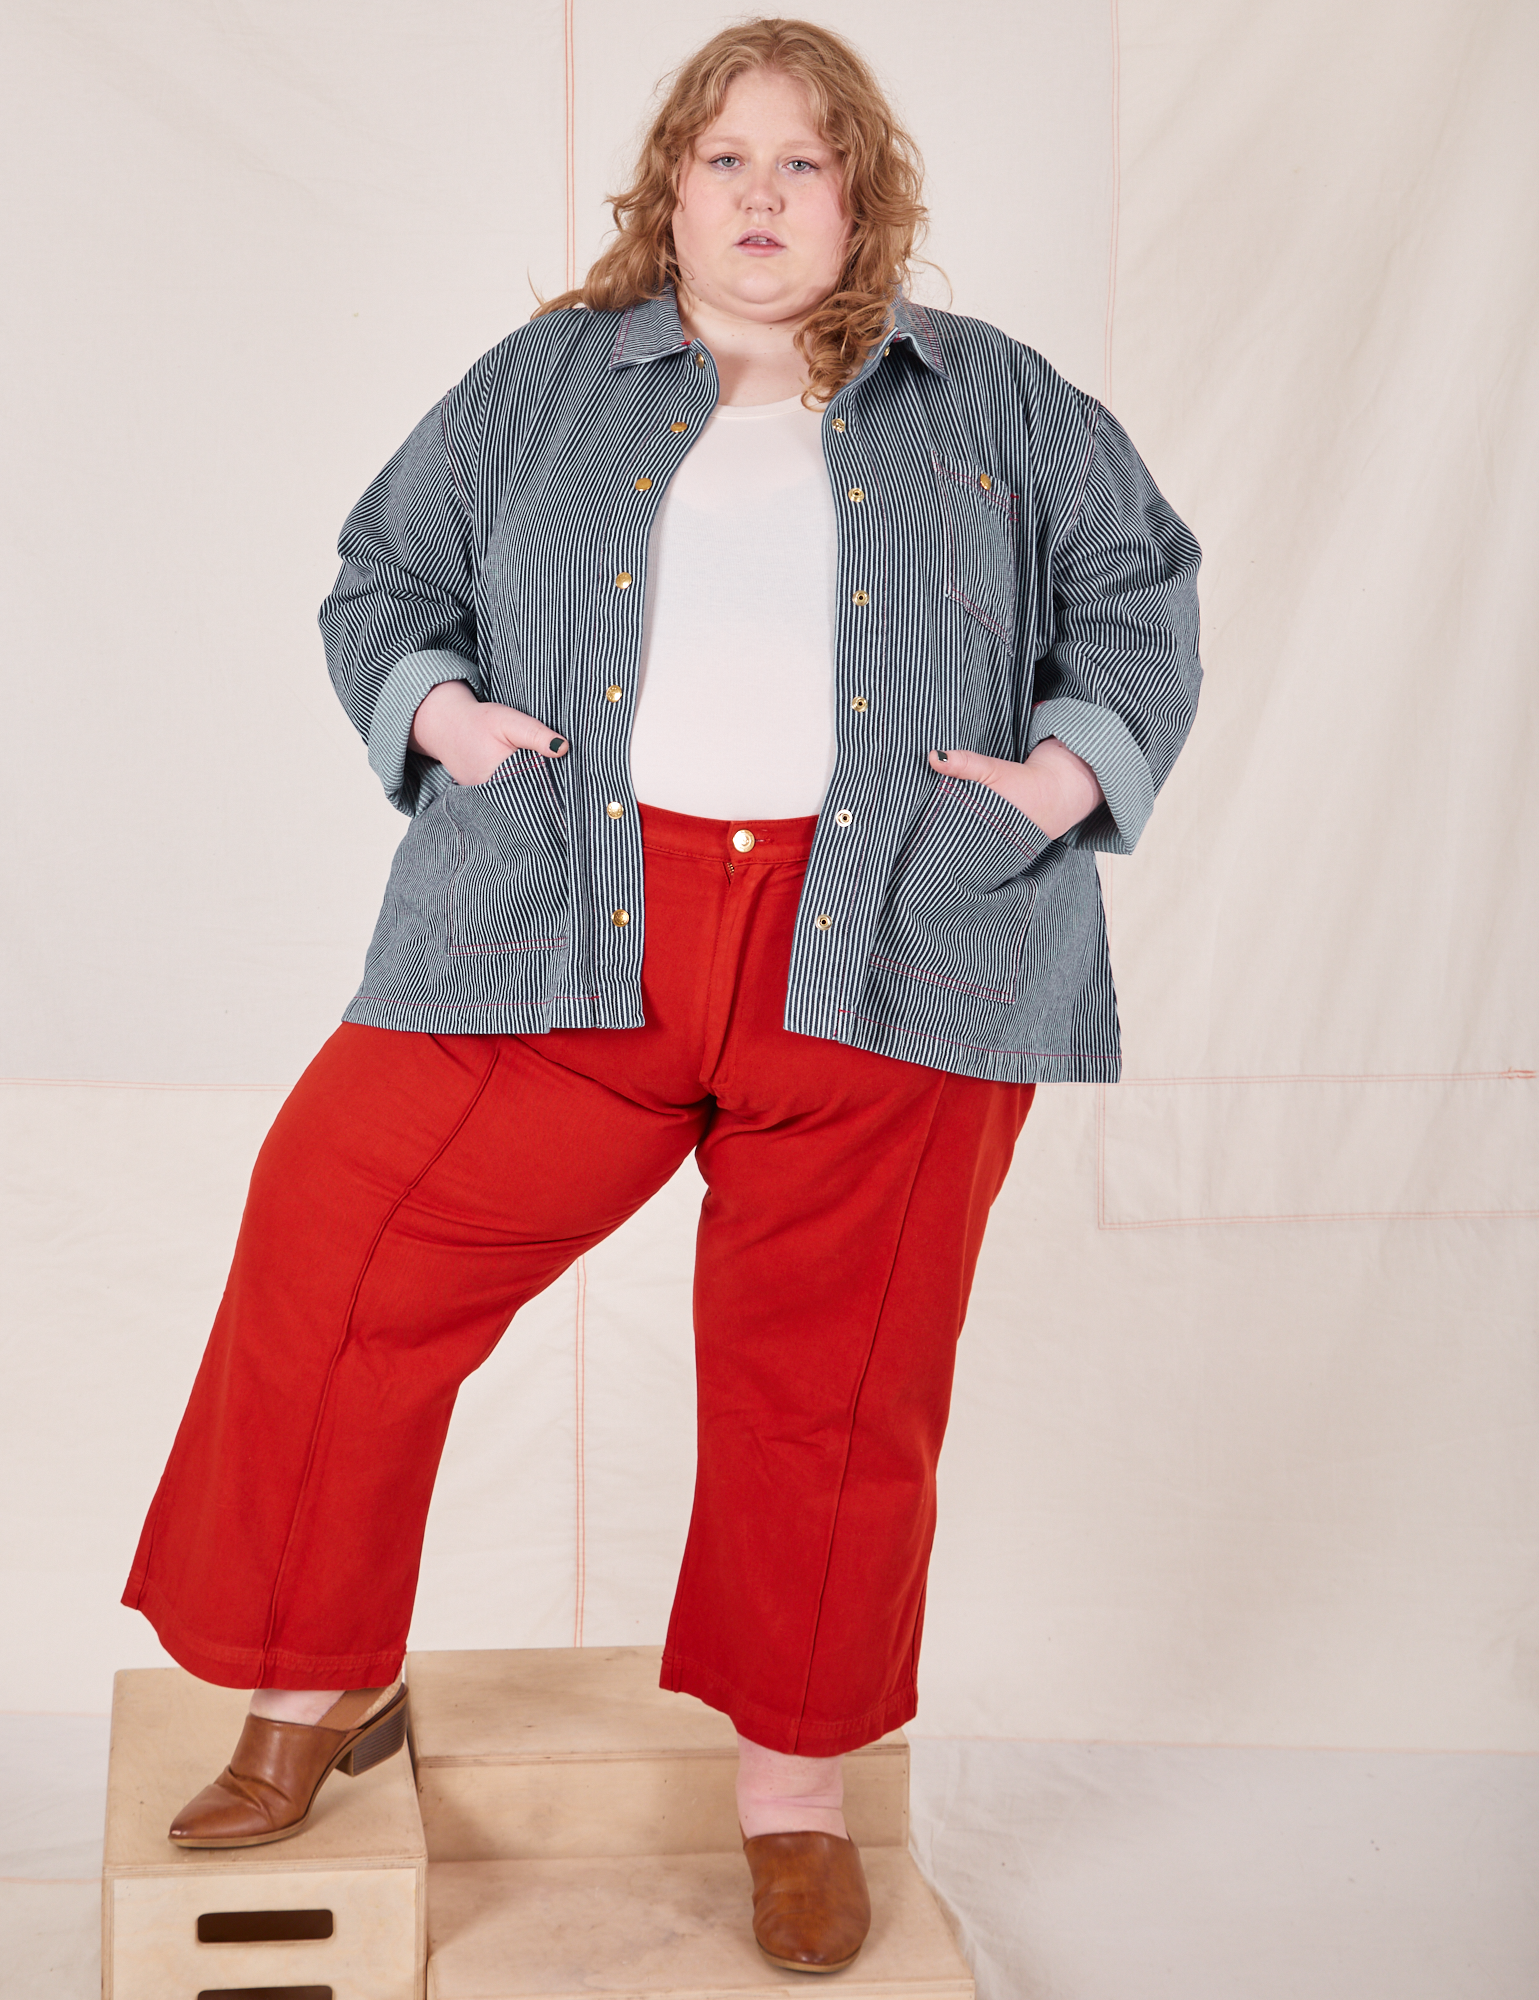 Catie is 5&#39;11&quot; and wearing 4XLRailroad Stripe Denim Work Jacket paired with paprika Western Pants